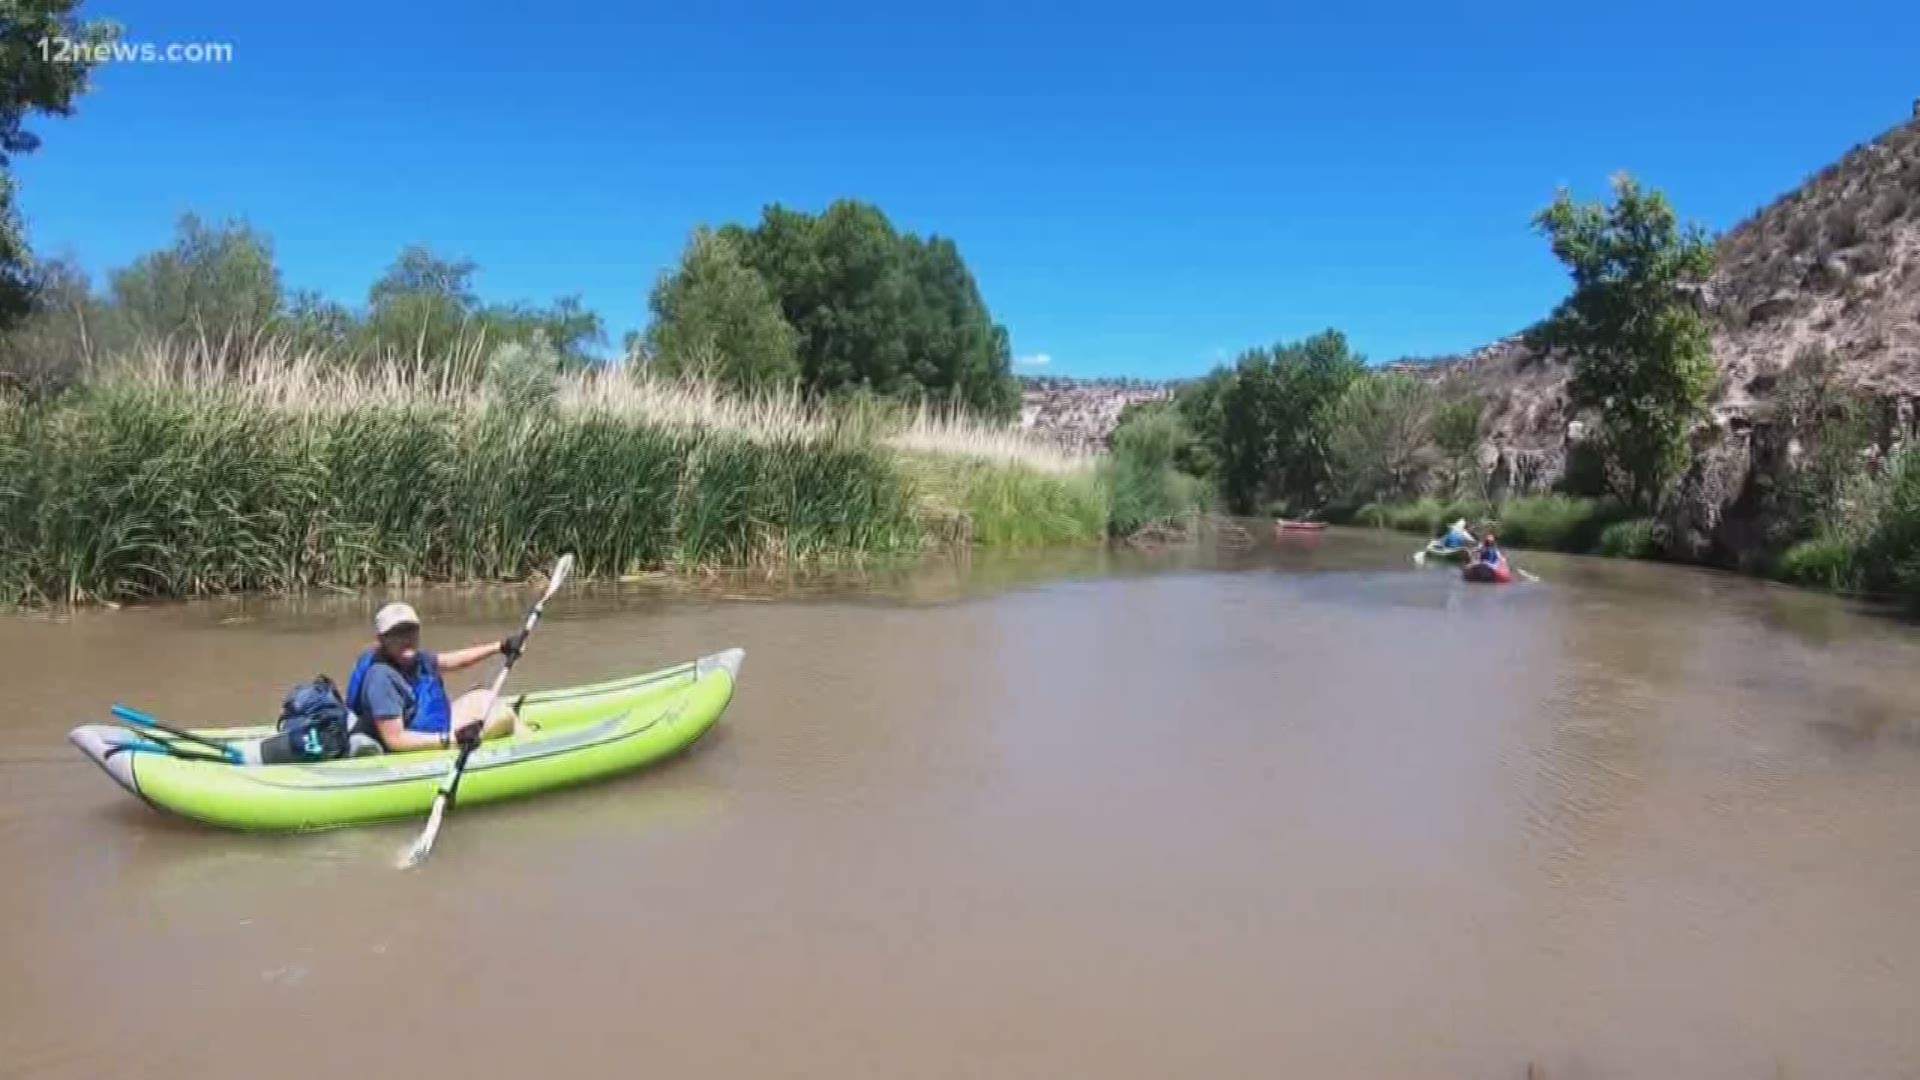 Watch this adventure down the rapids of the Verde River for some incredible scenery.